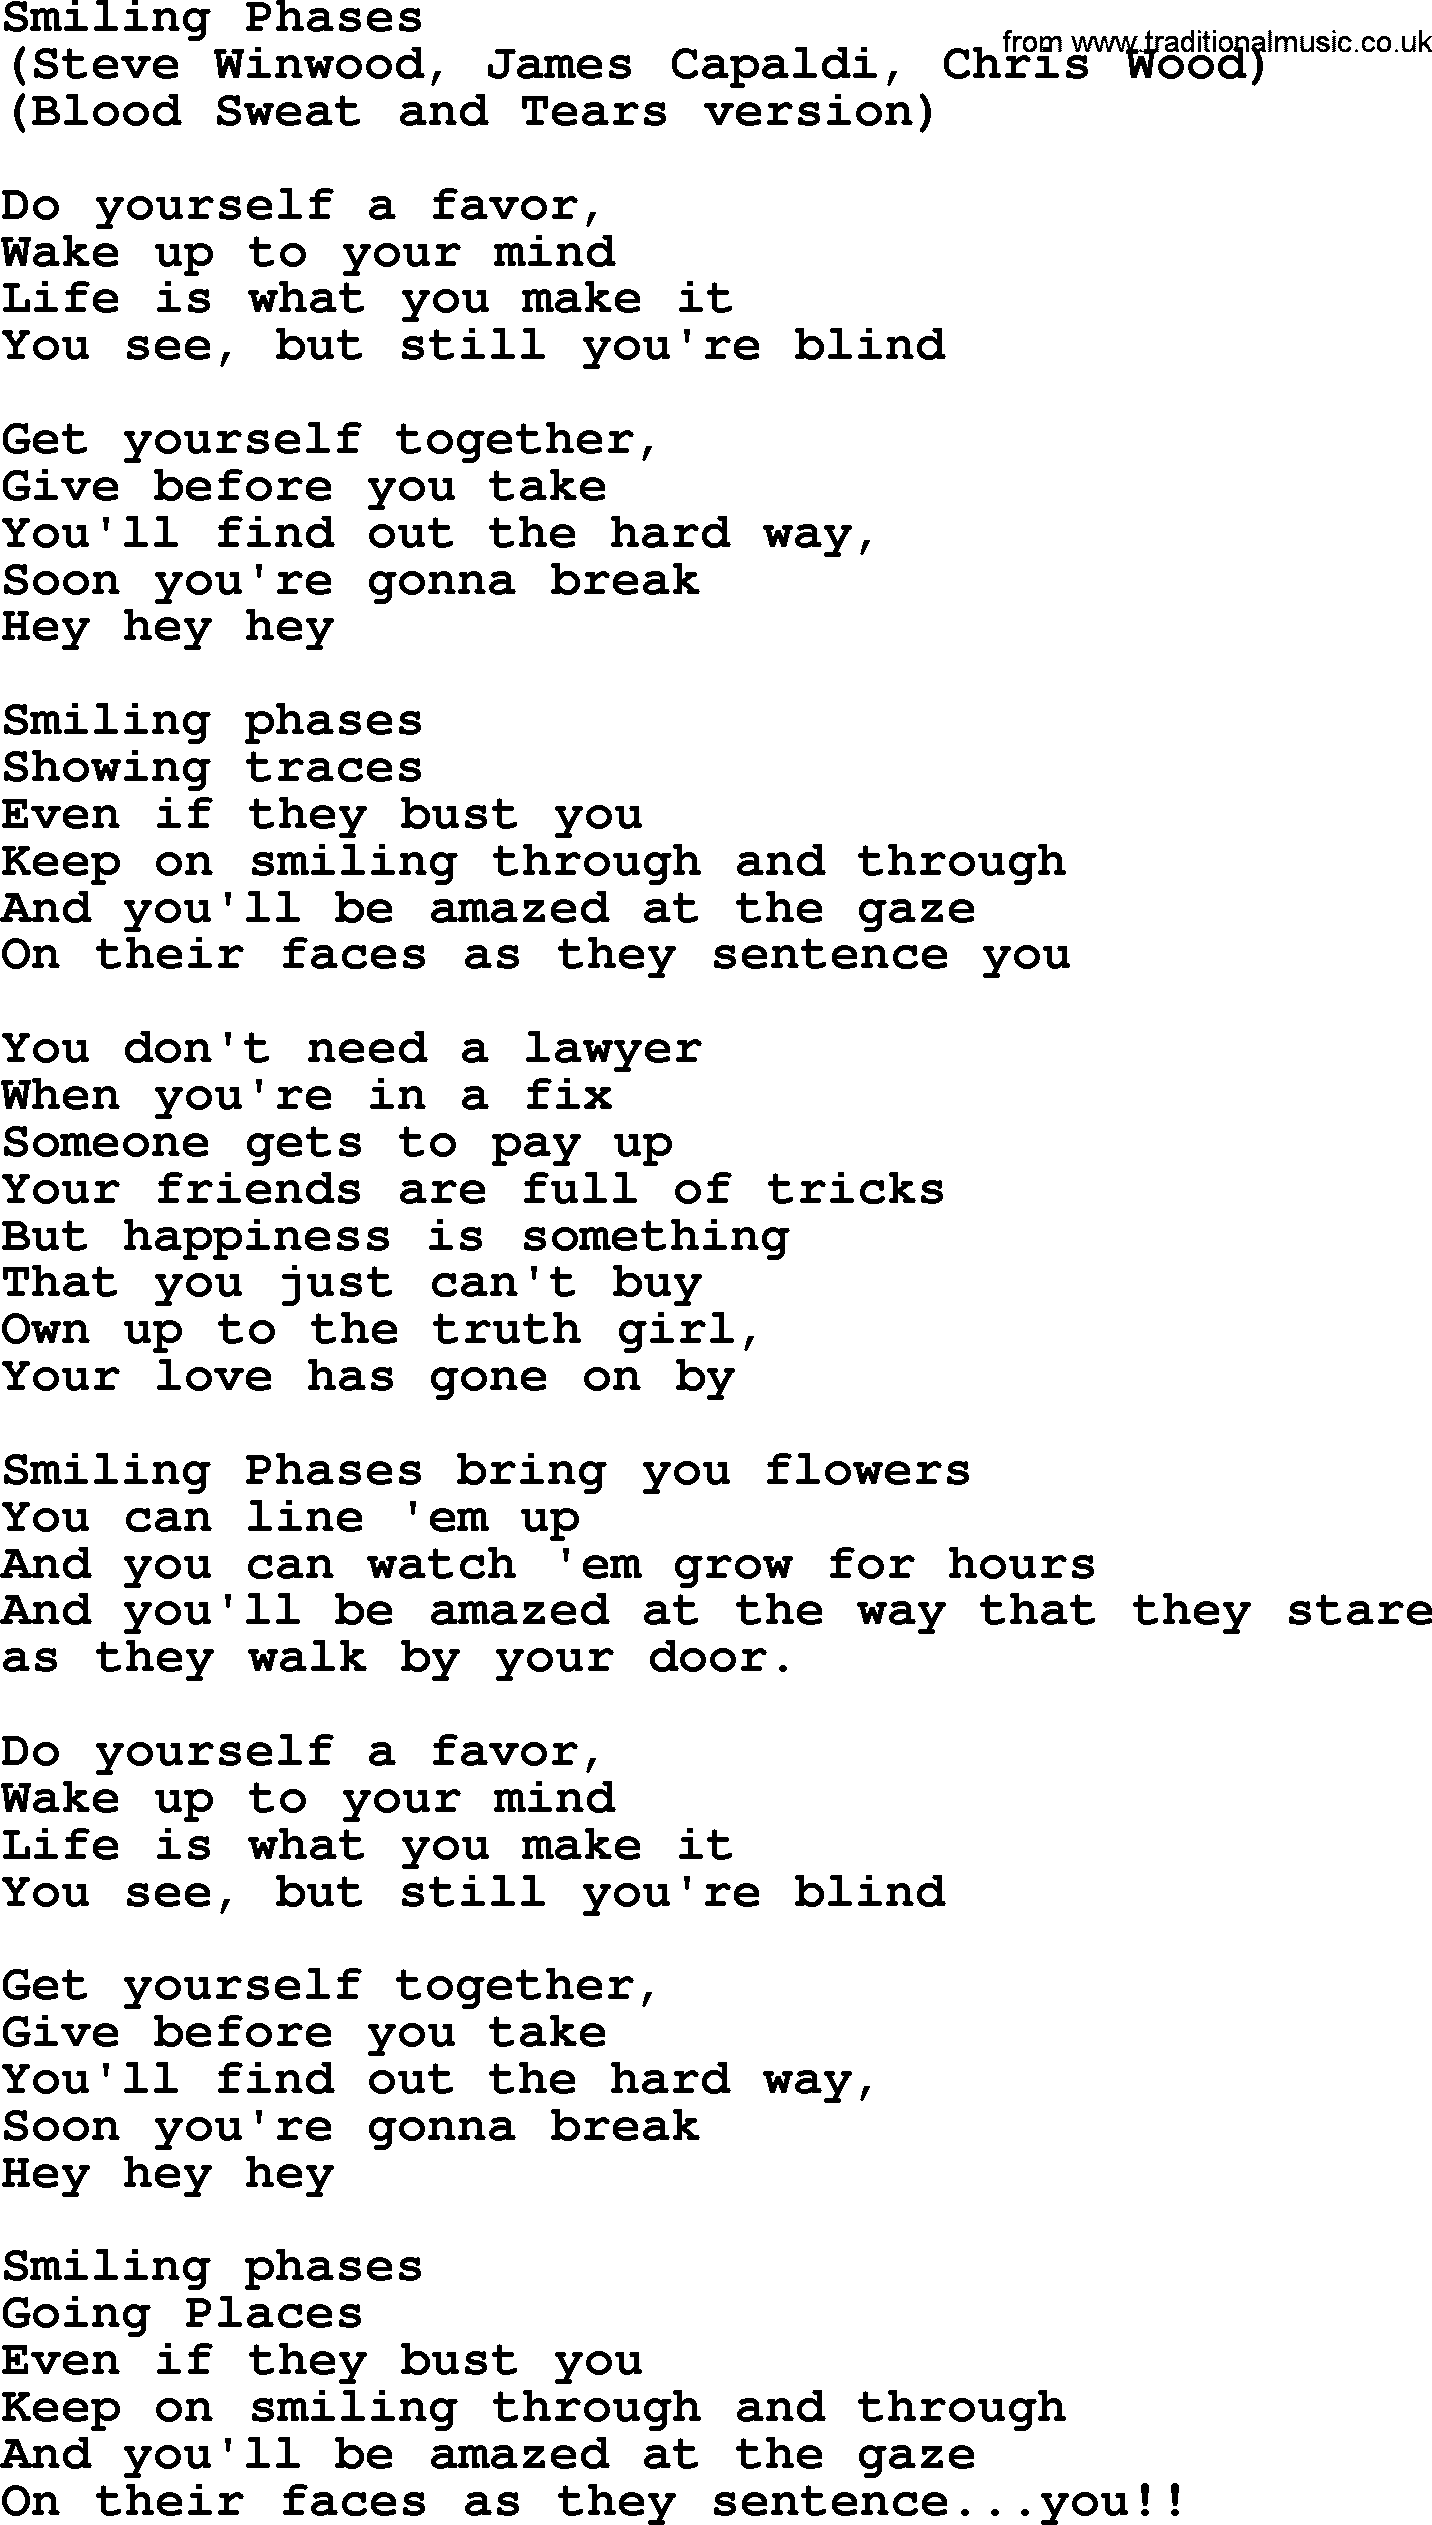 The Byrds song Smiling Phases, lyrics